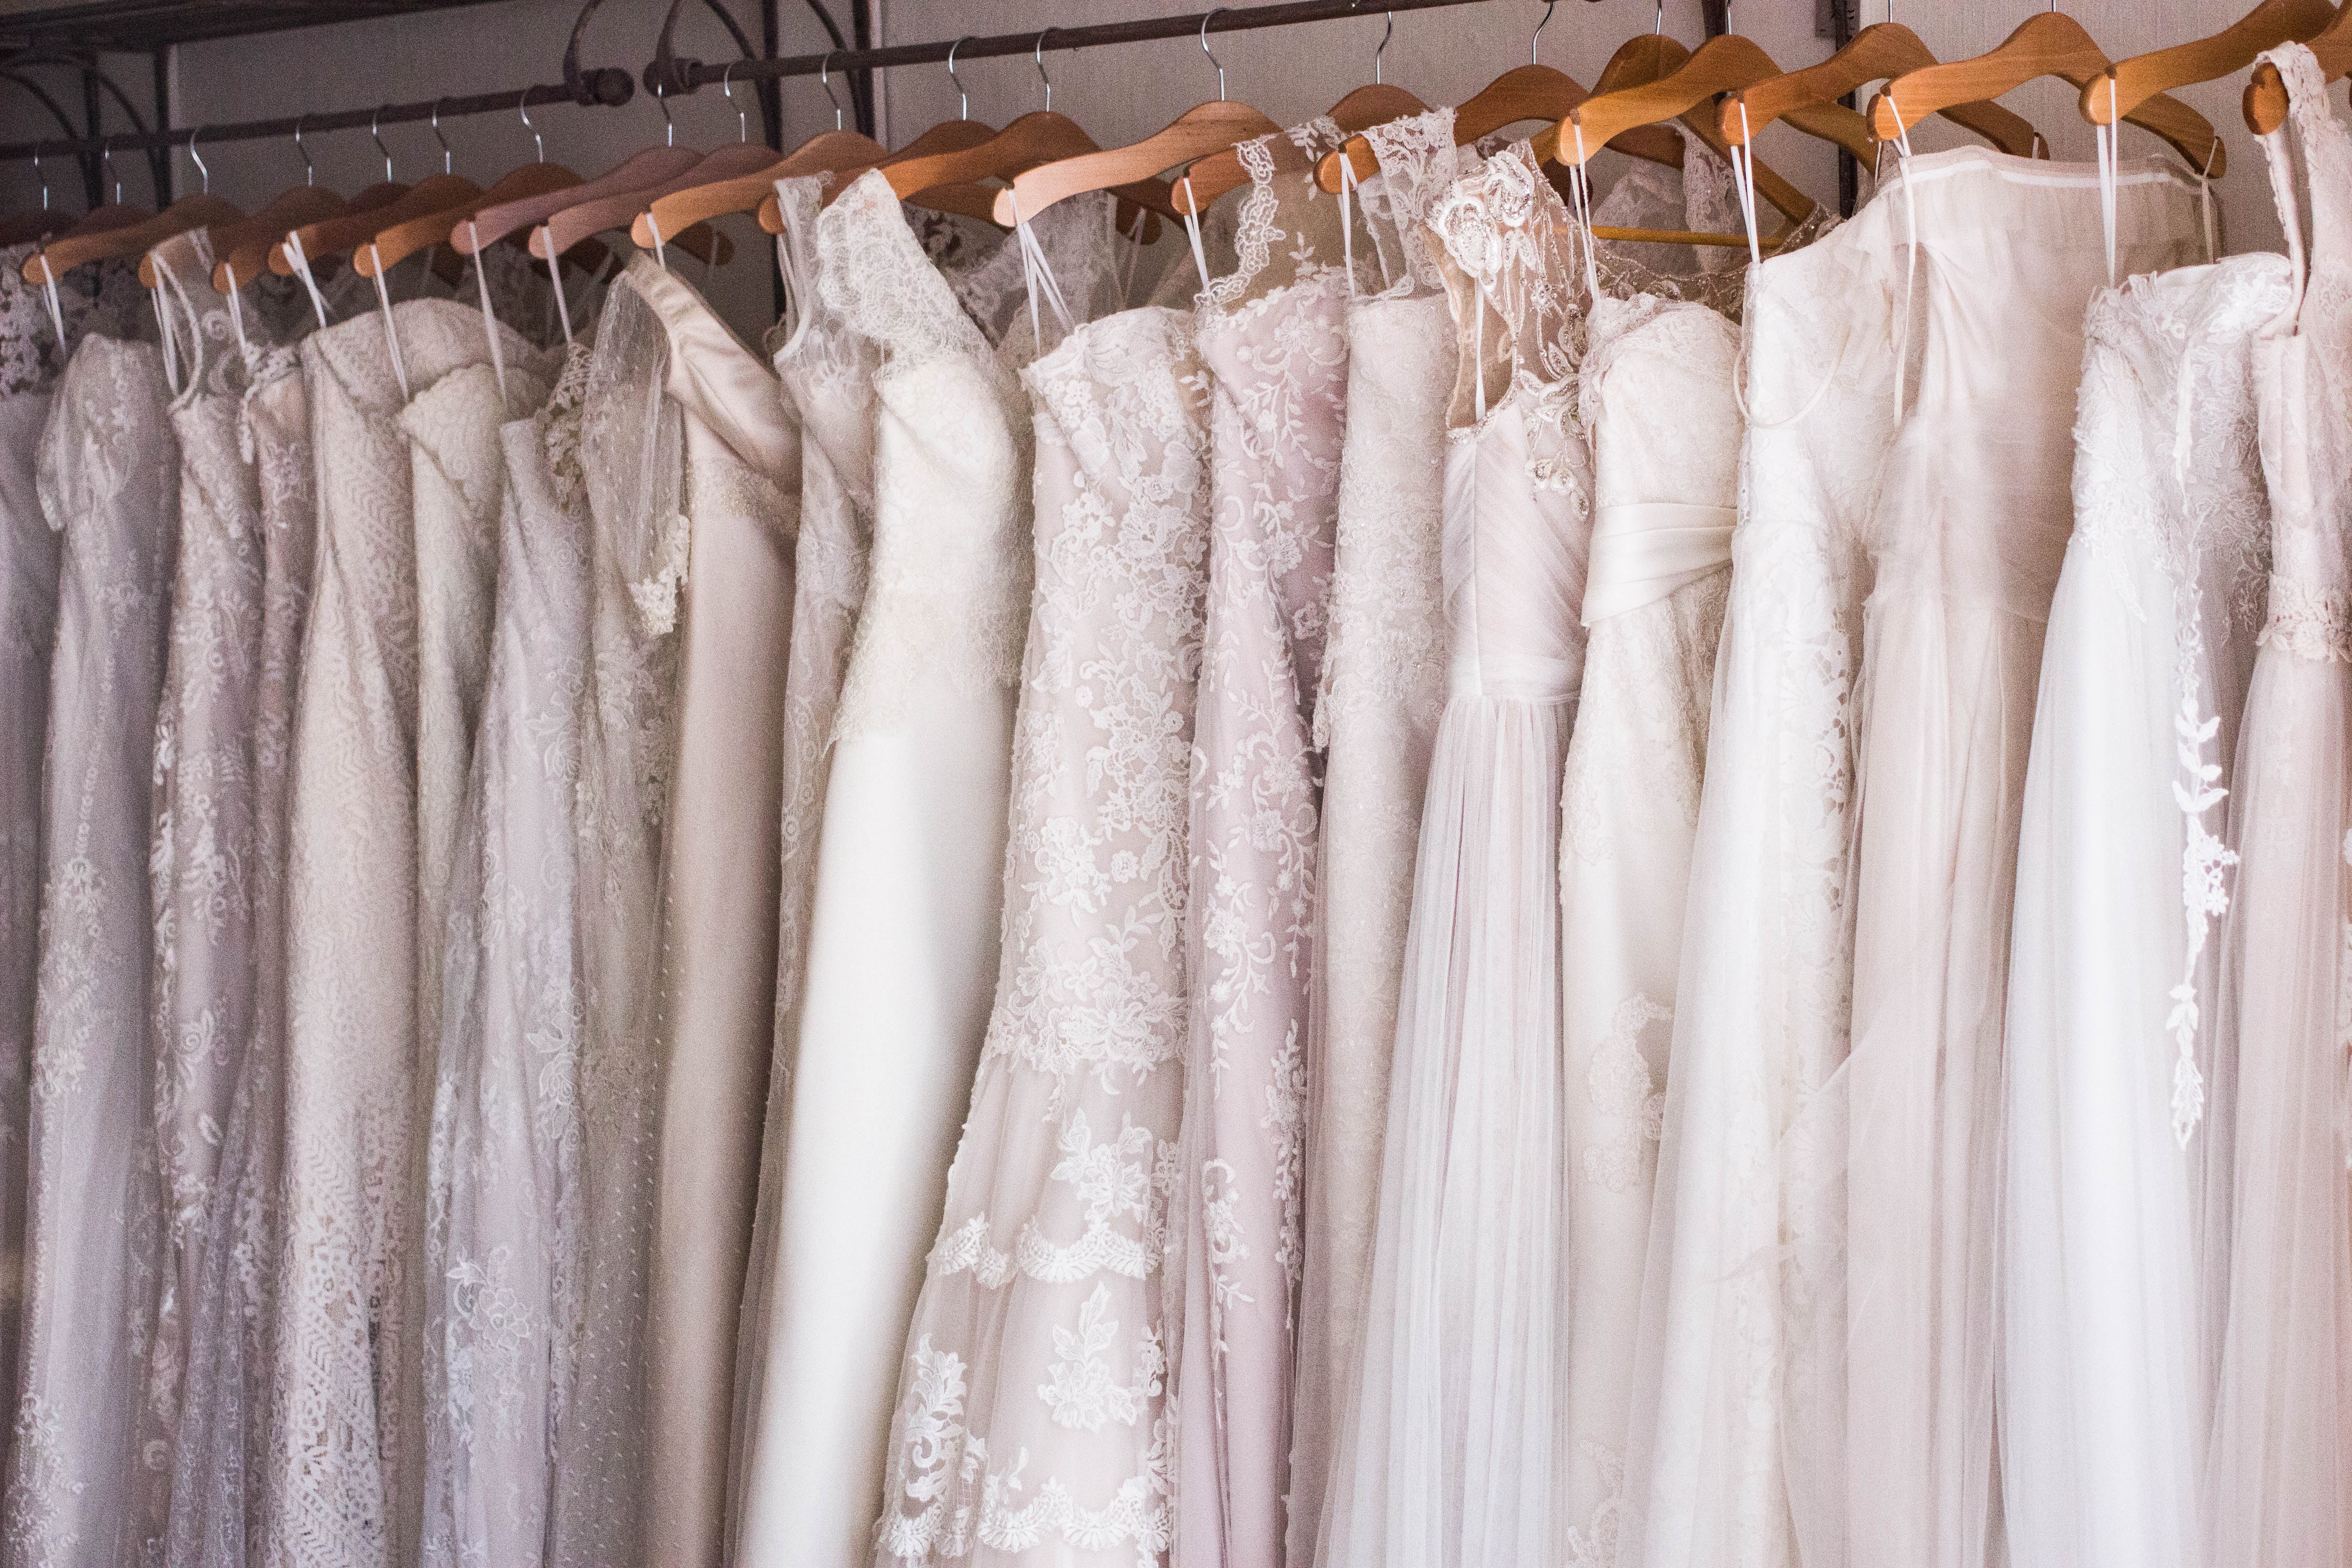 wedding dresses hung up in a row